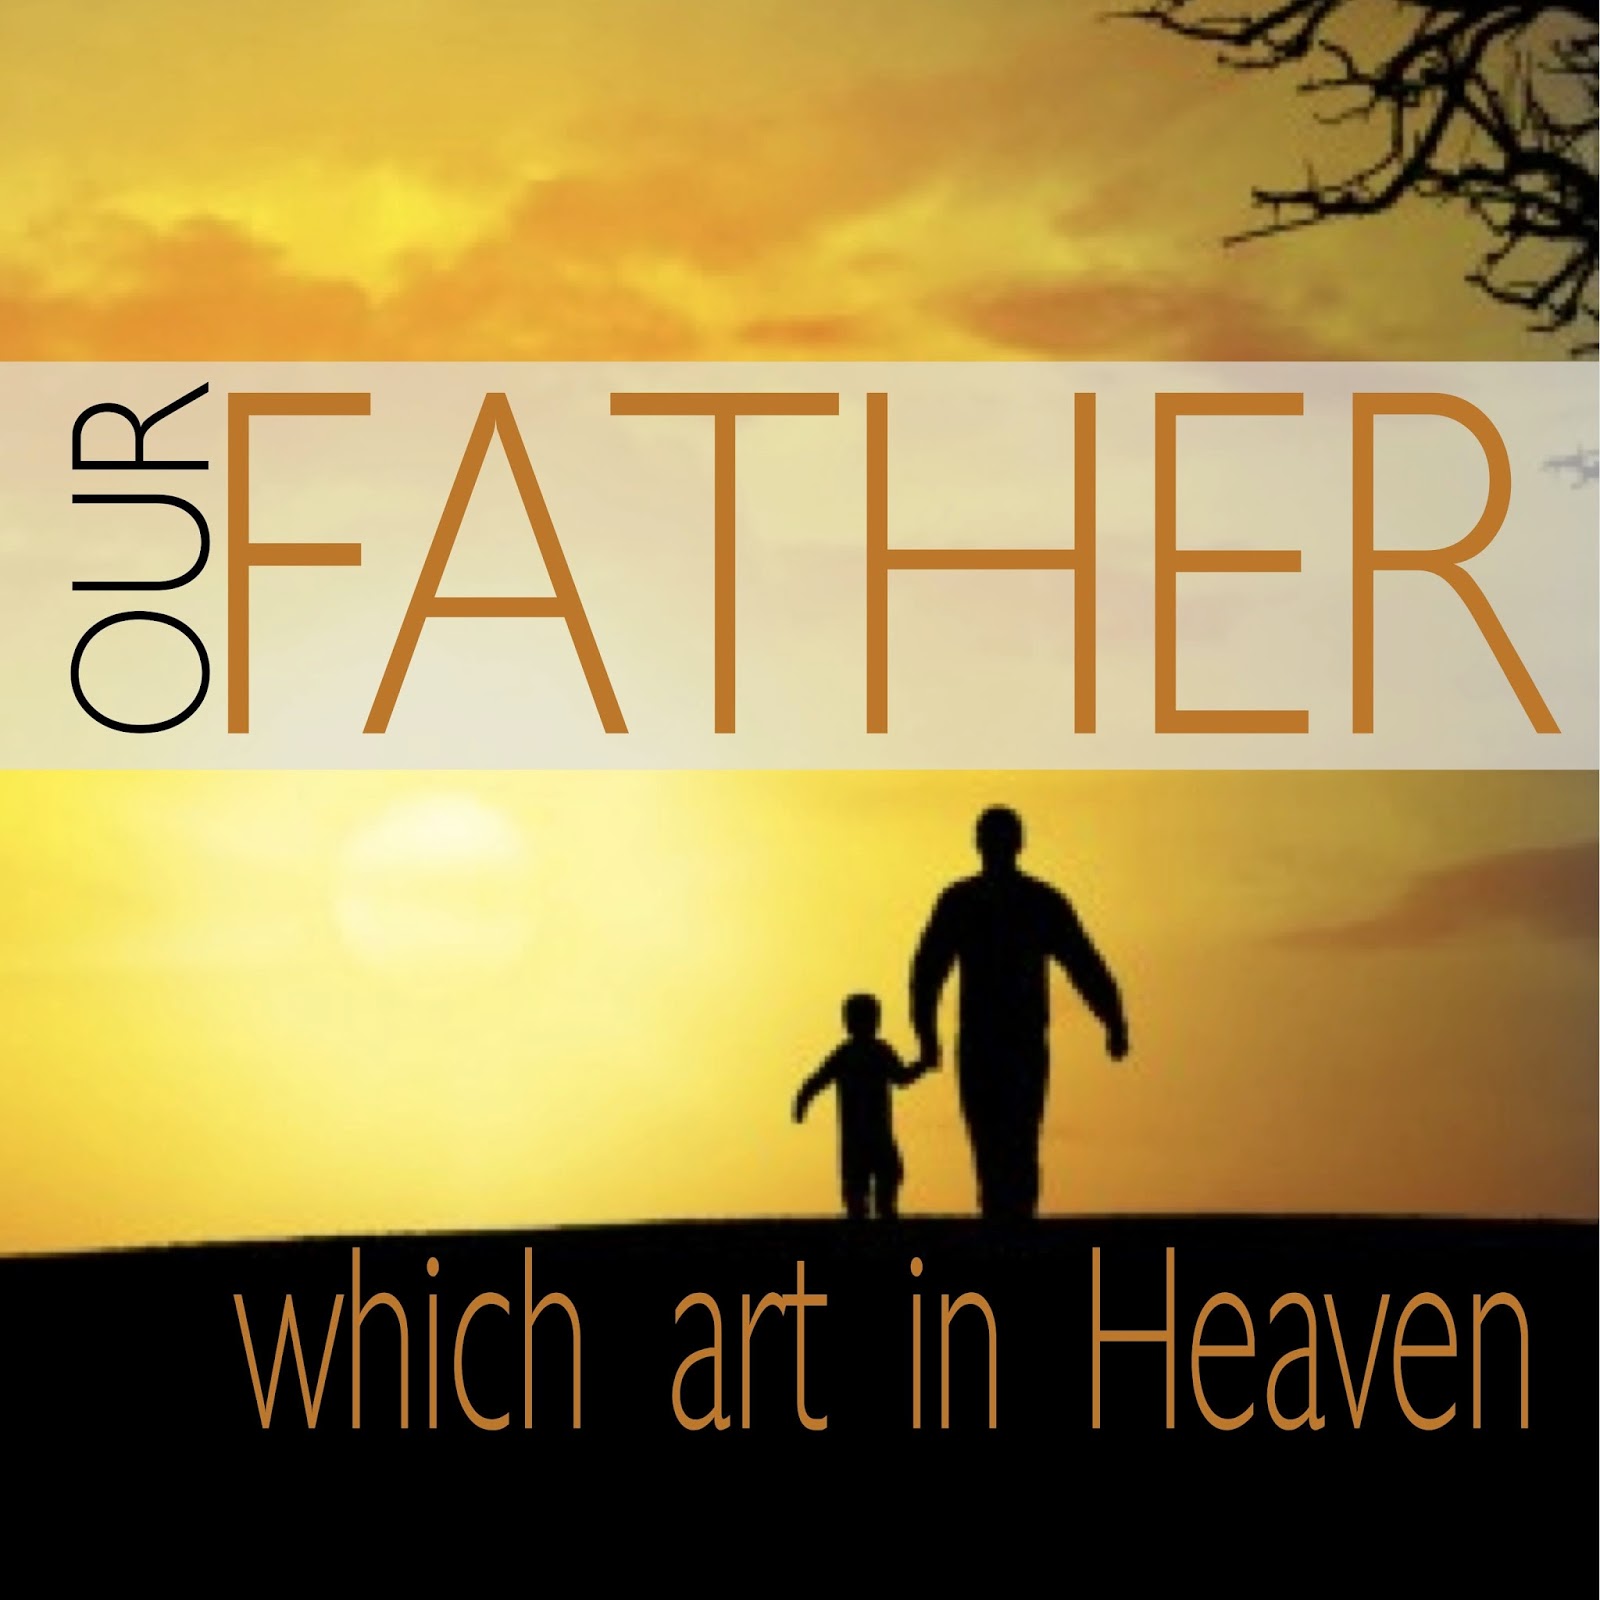 Susans father often had. Our father. Our father in Heaven old Version.